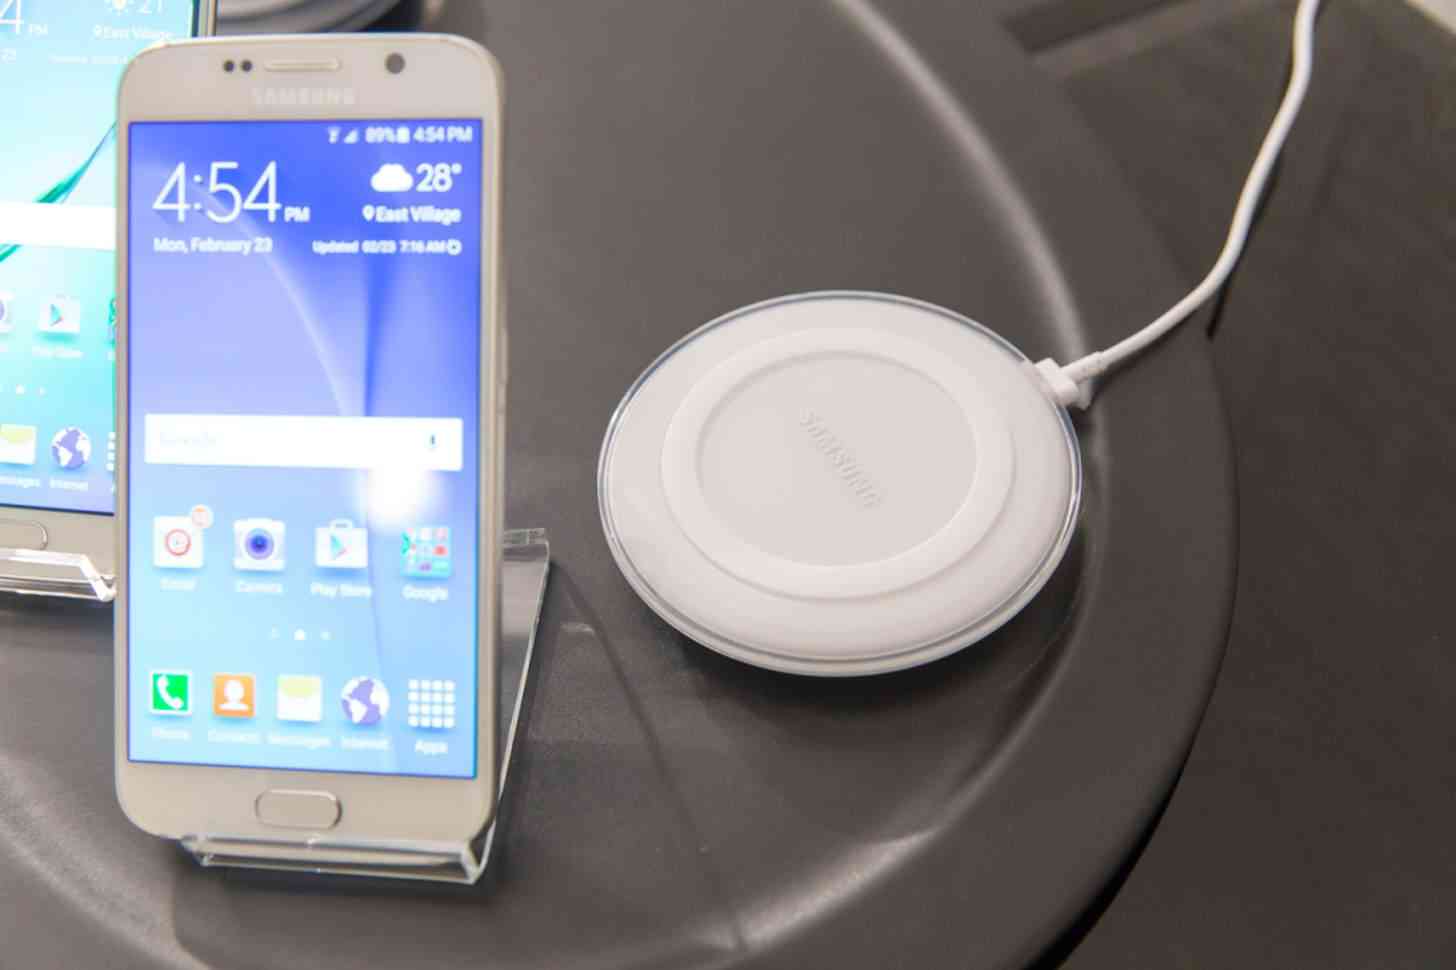 Samsung Galaxy S6 wireless charger